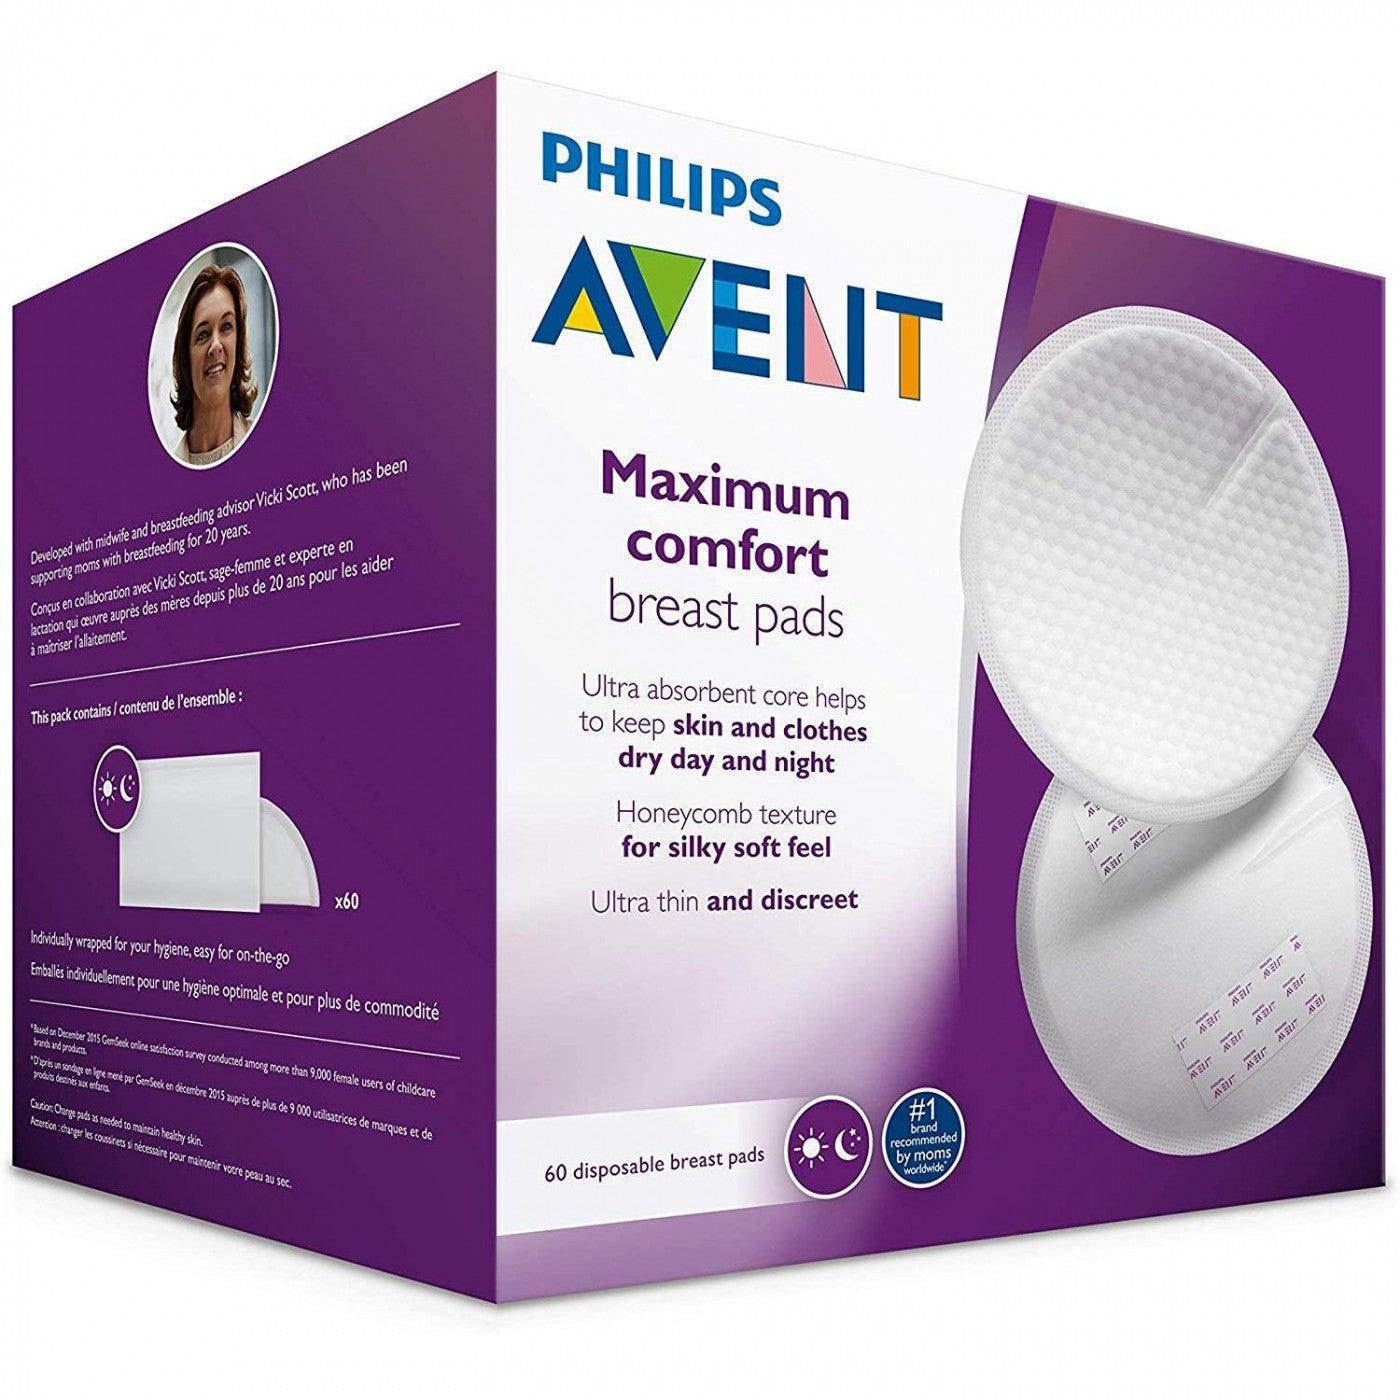 http://marikali.cy/cdn/shop/files/philips-avent-avt25461-avent-disposable-breast-pads-x60-maternity-breast-pads-shop-shopifycountryname.jpg?v=1685551133